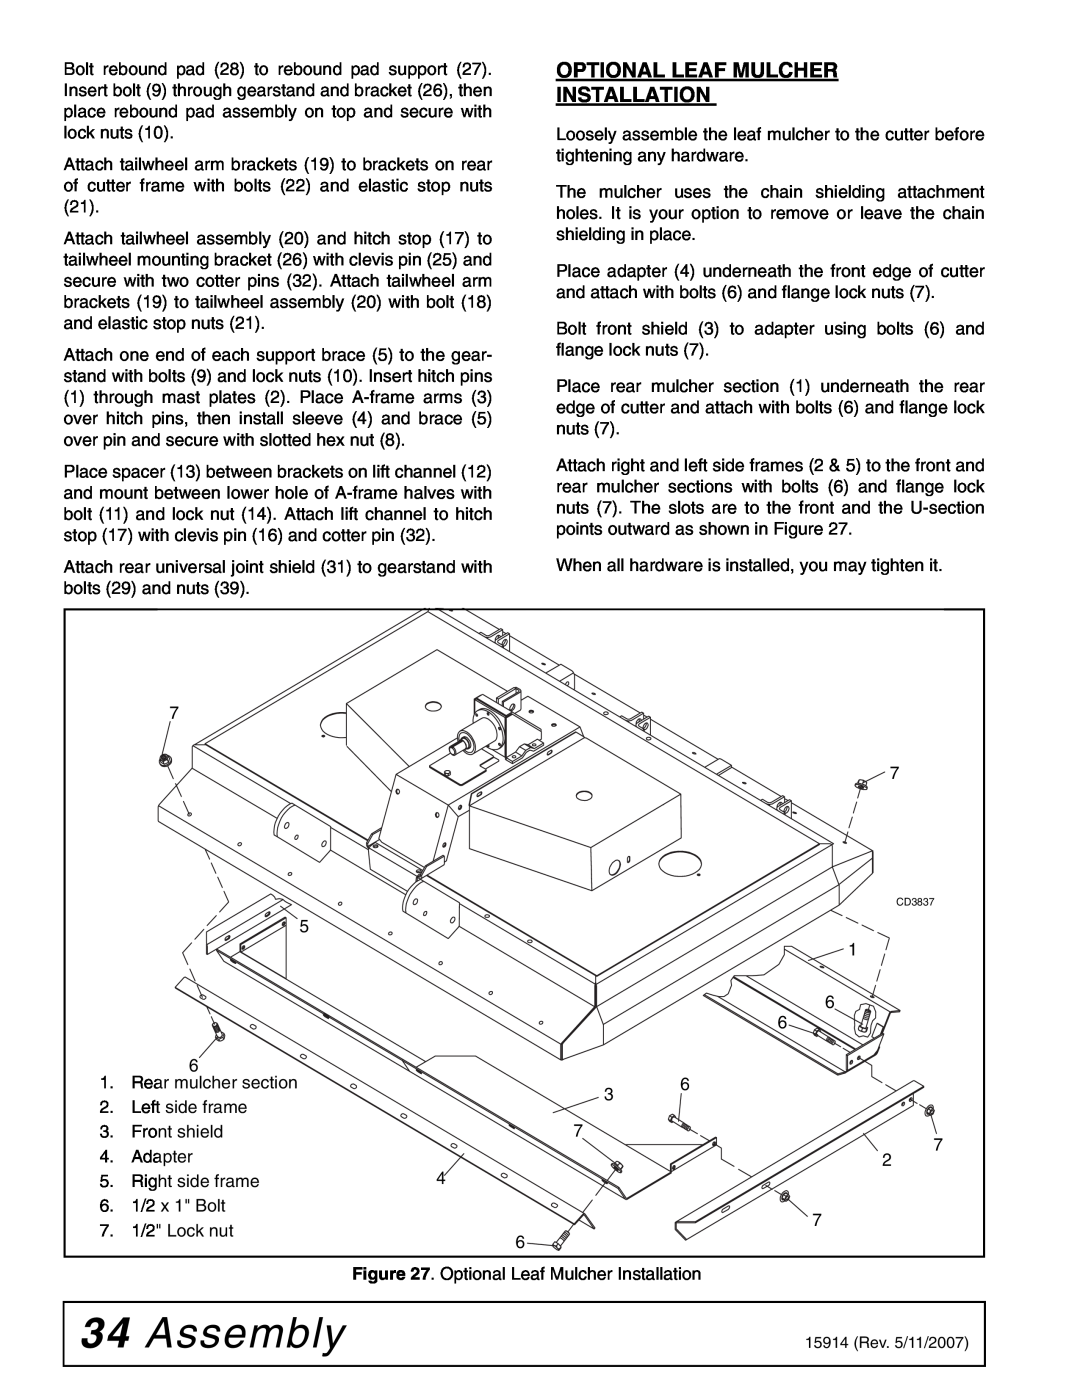 Woods Equipment MD80-2 manual Assembly, Optional Leaf Mulcher Installation 